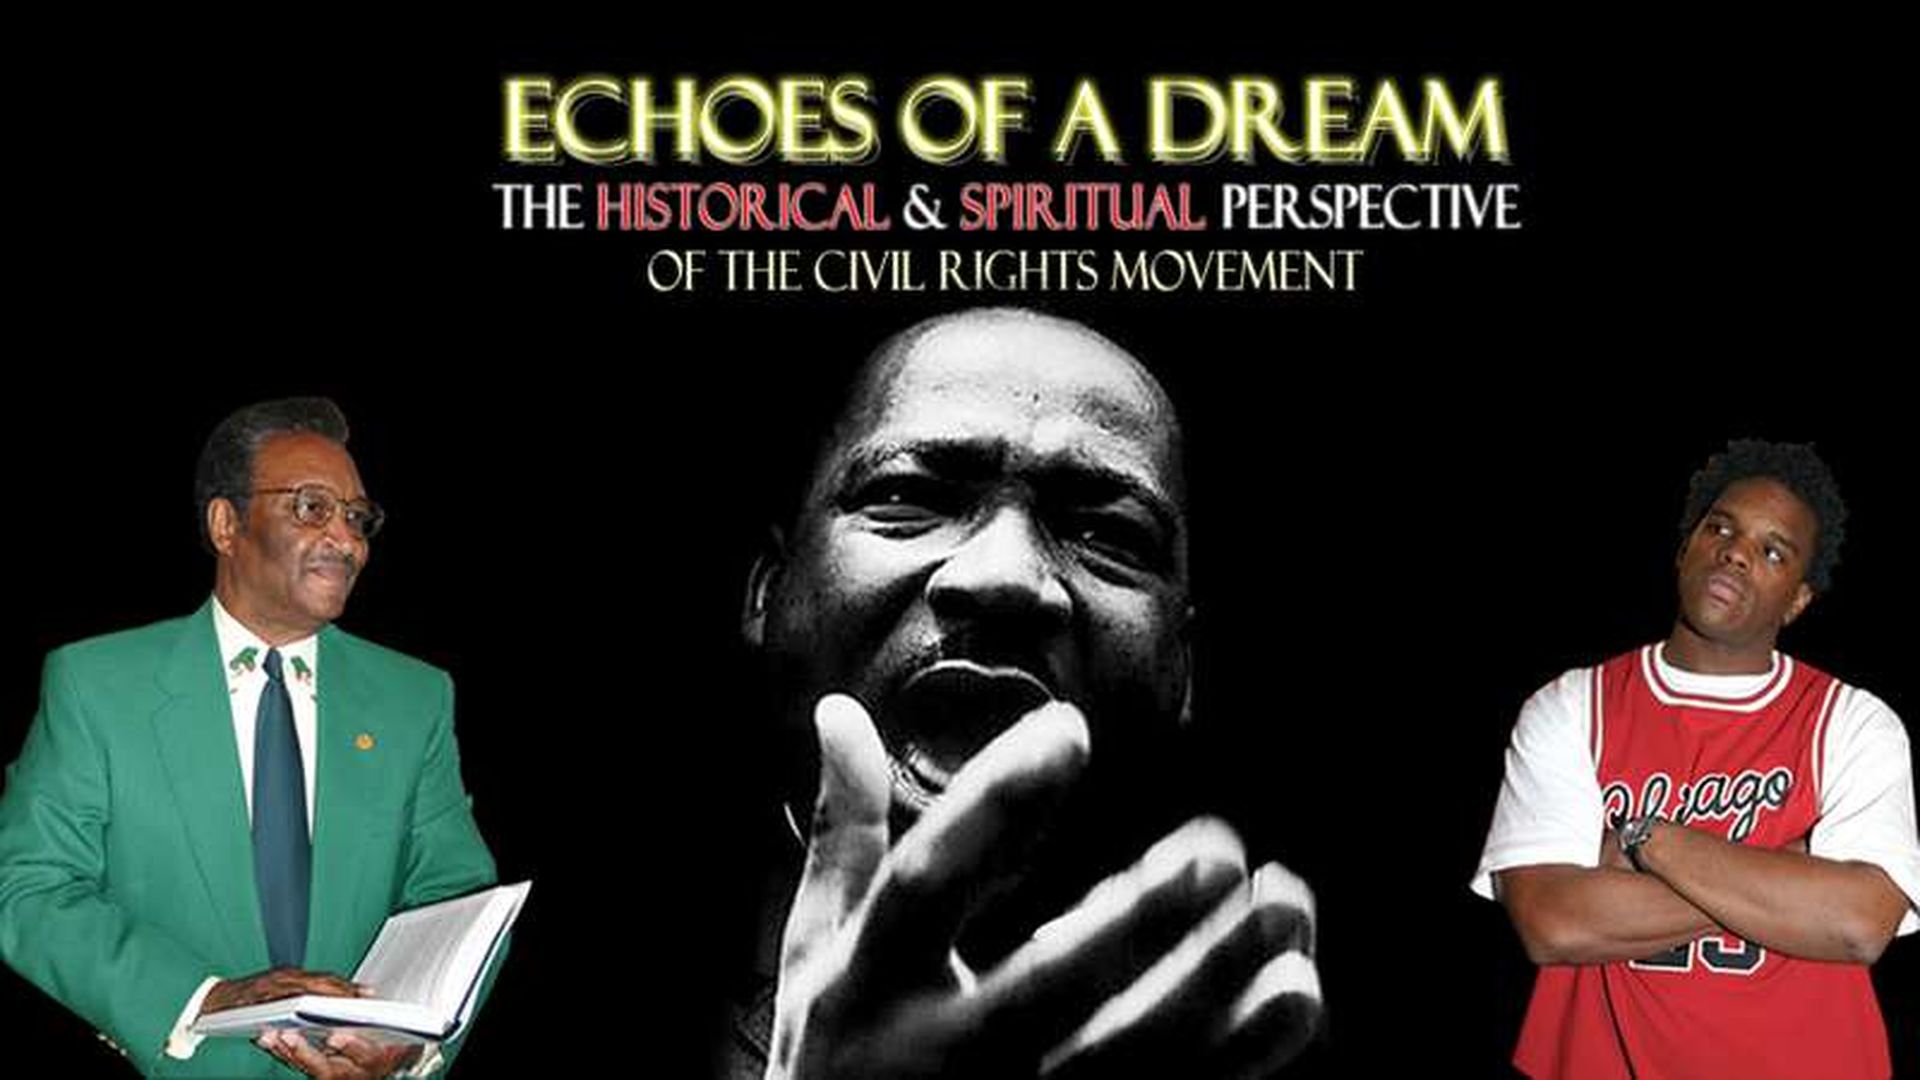 ECHOES OF A DREAM: THE HISTORICAL &SPIRITUAL PERPECTIVE OF THE CILVIL RIGHTS MOVEMENT